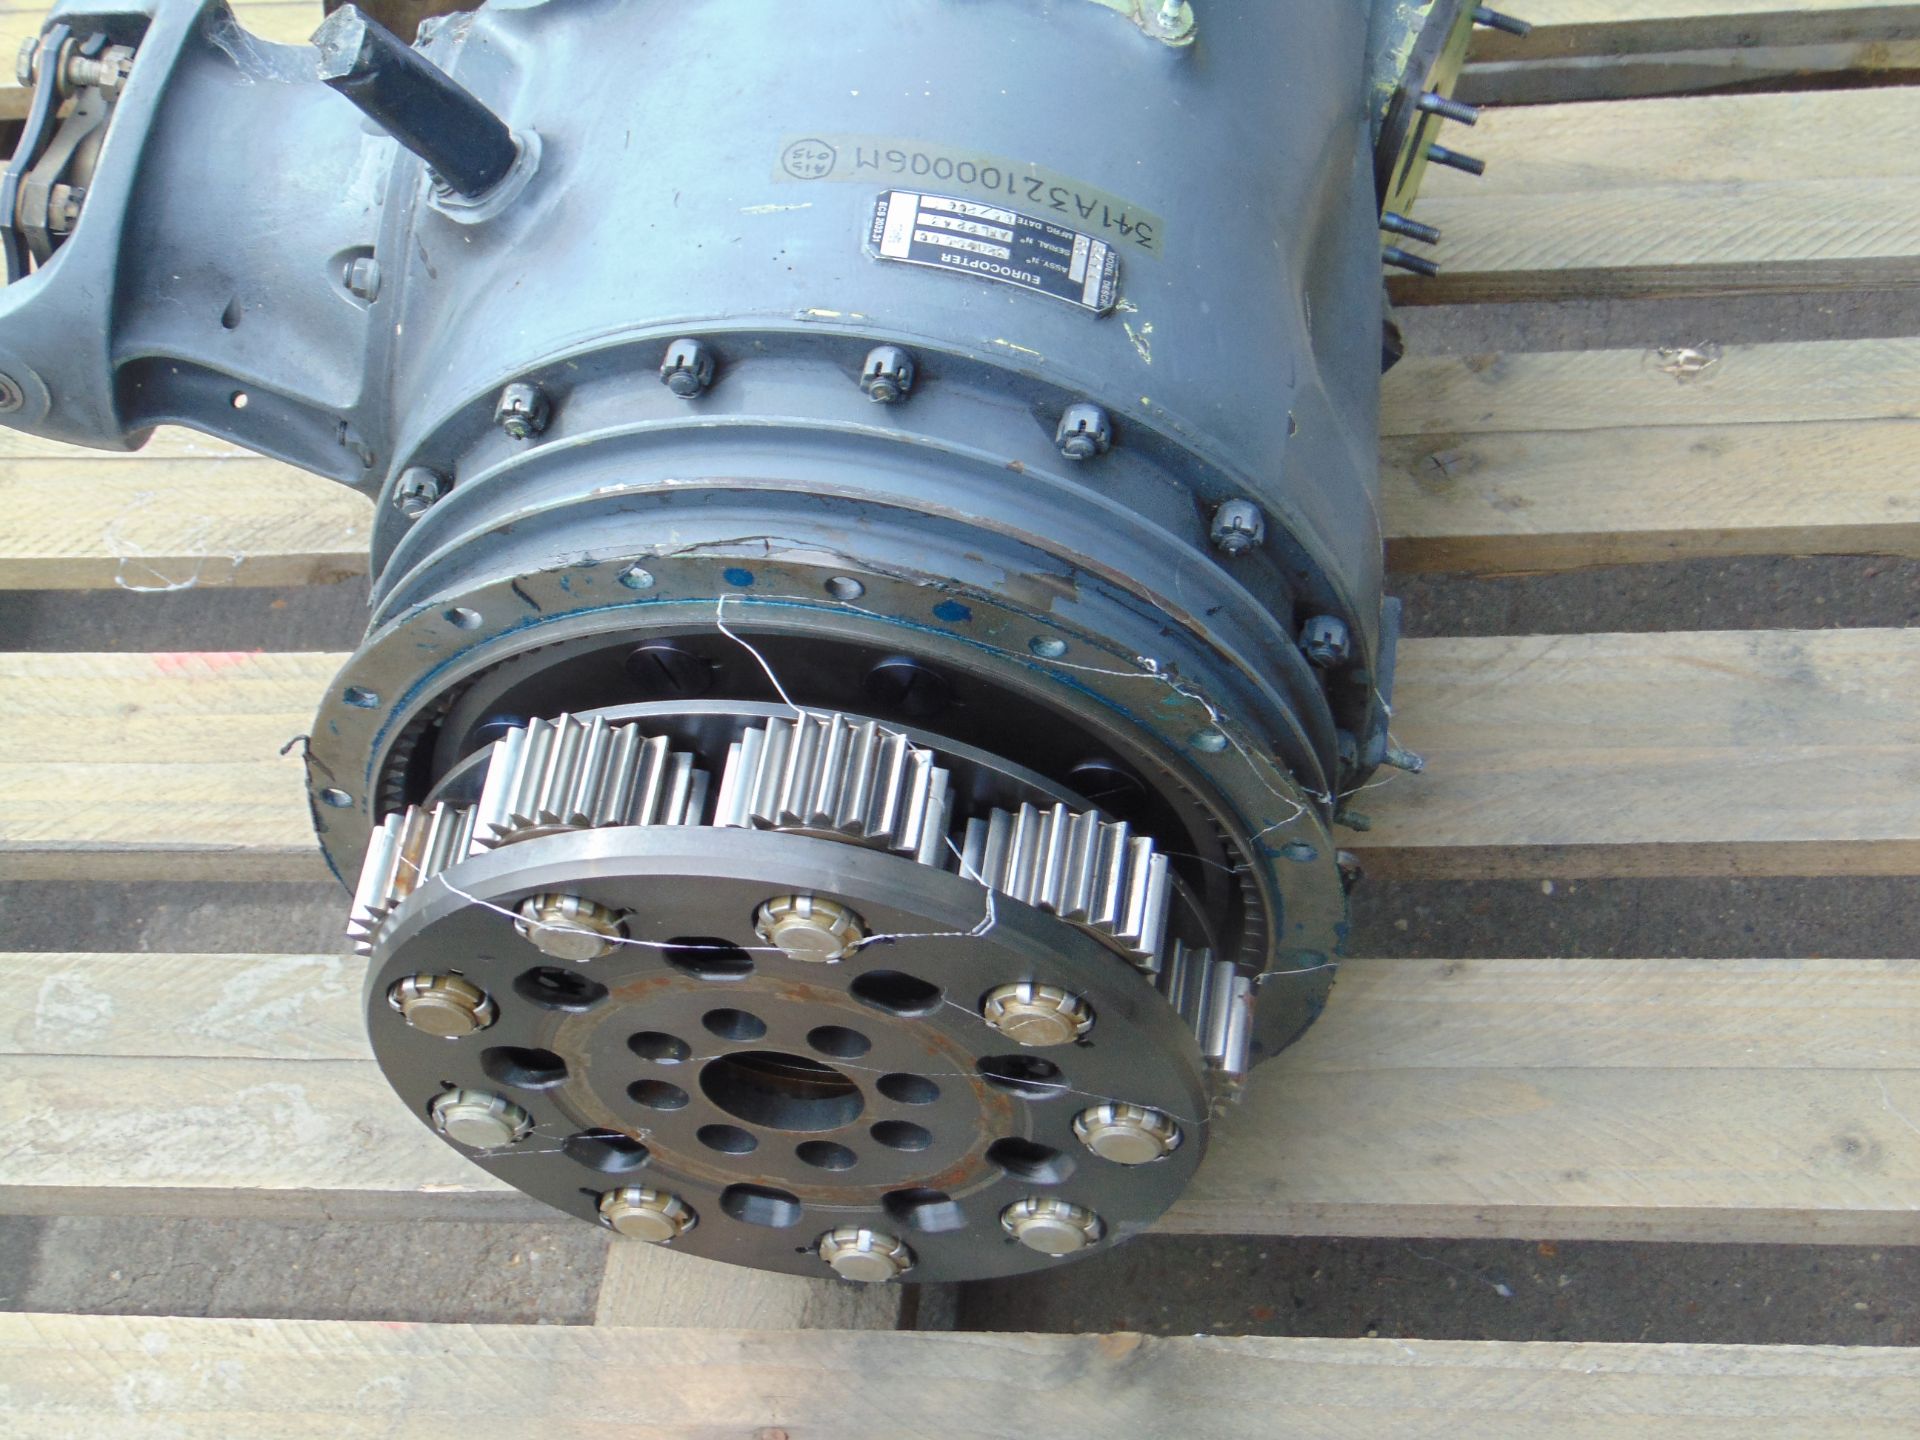 GAZELLE MAIN ROTOR GEARBOX ASSEMBLY - Image 5 of 6